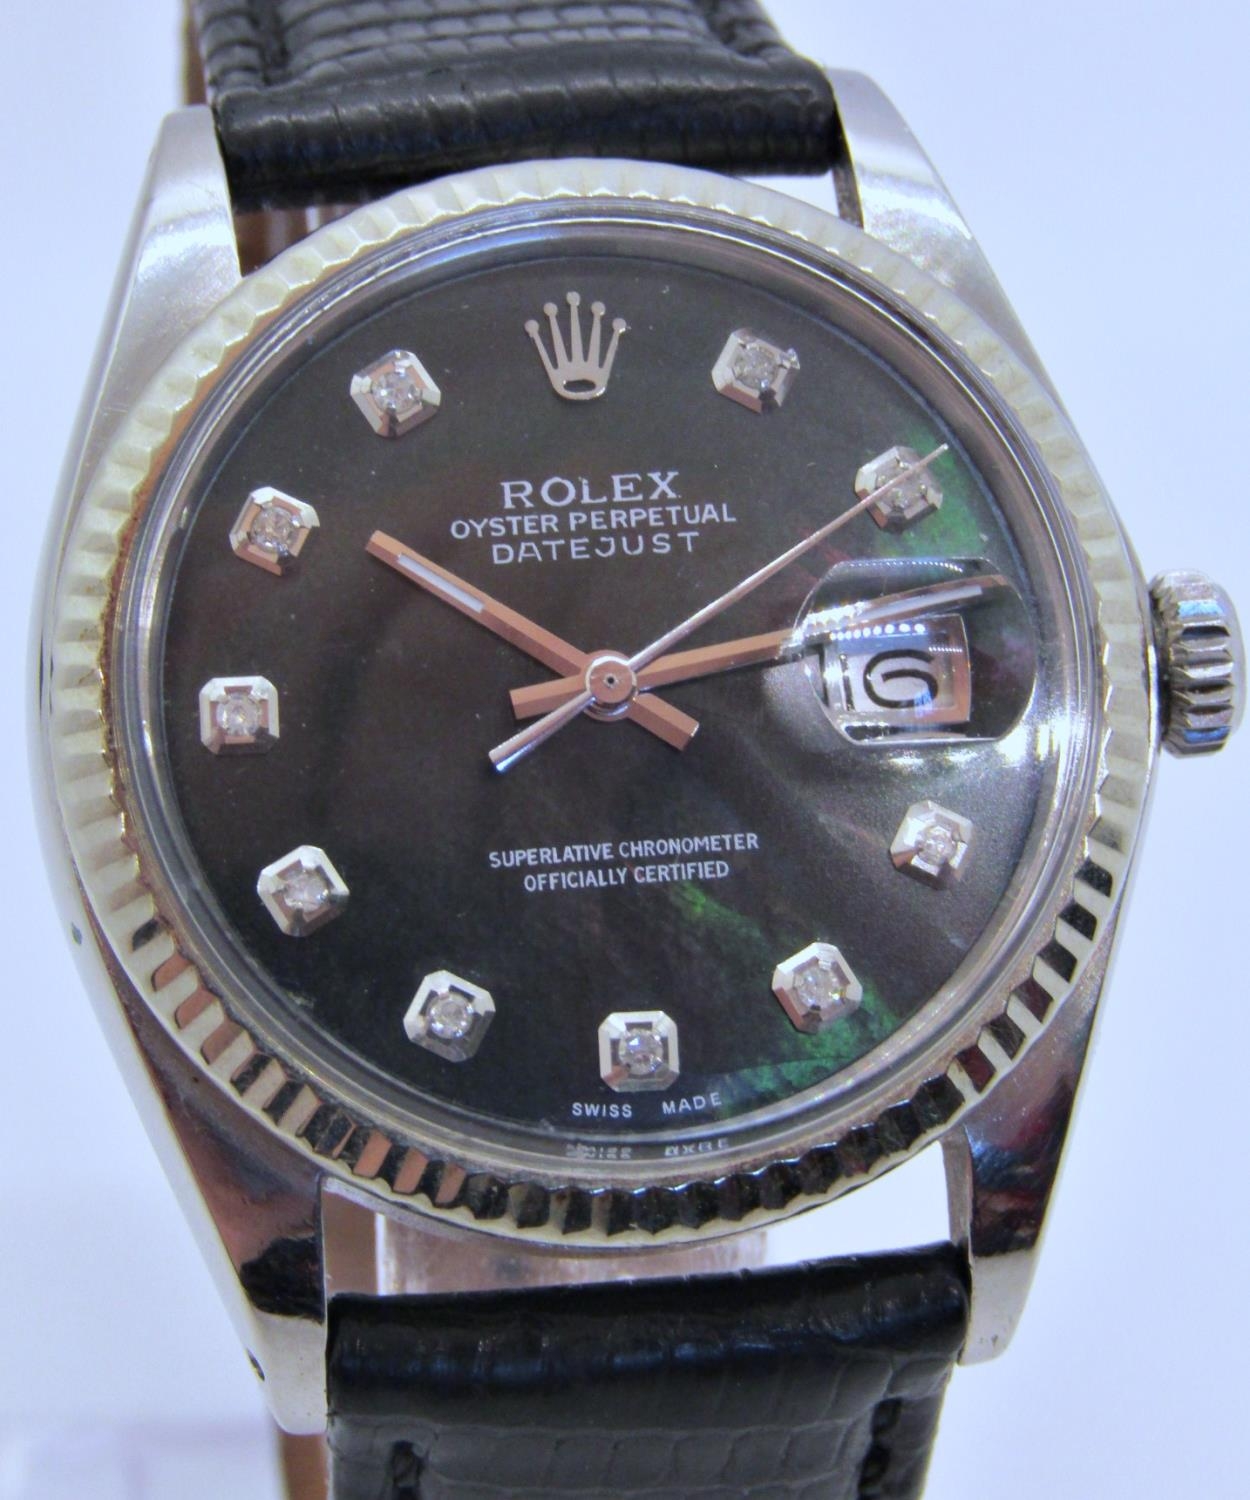 Rolex Oyster Perpetual date just with blue diamond dial, 1972, currently running - Image 2 of 5